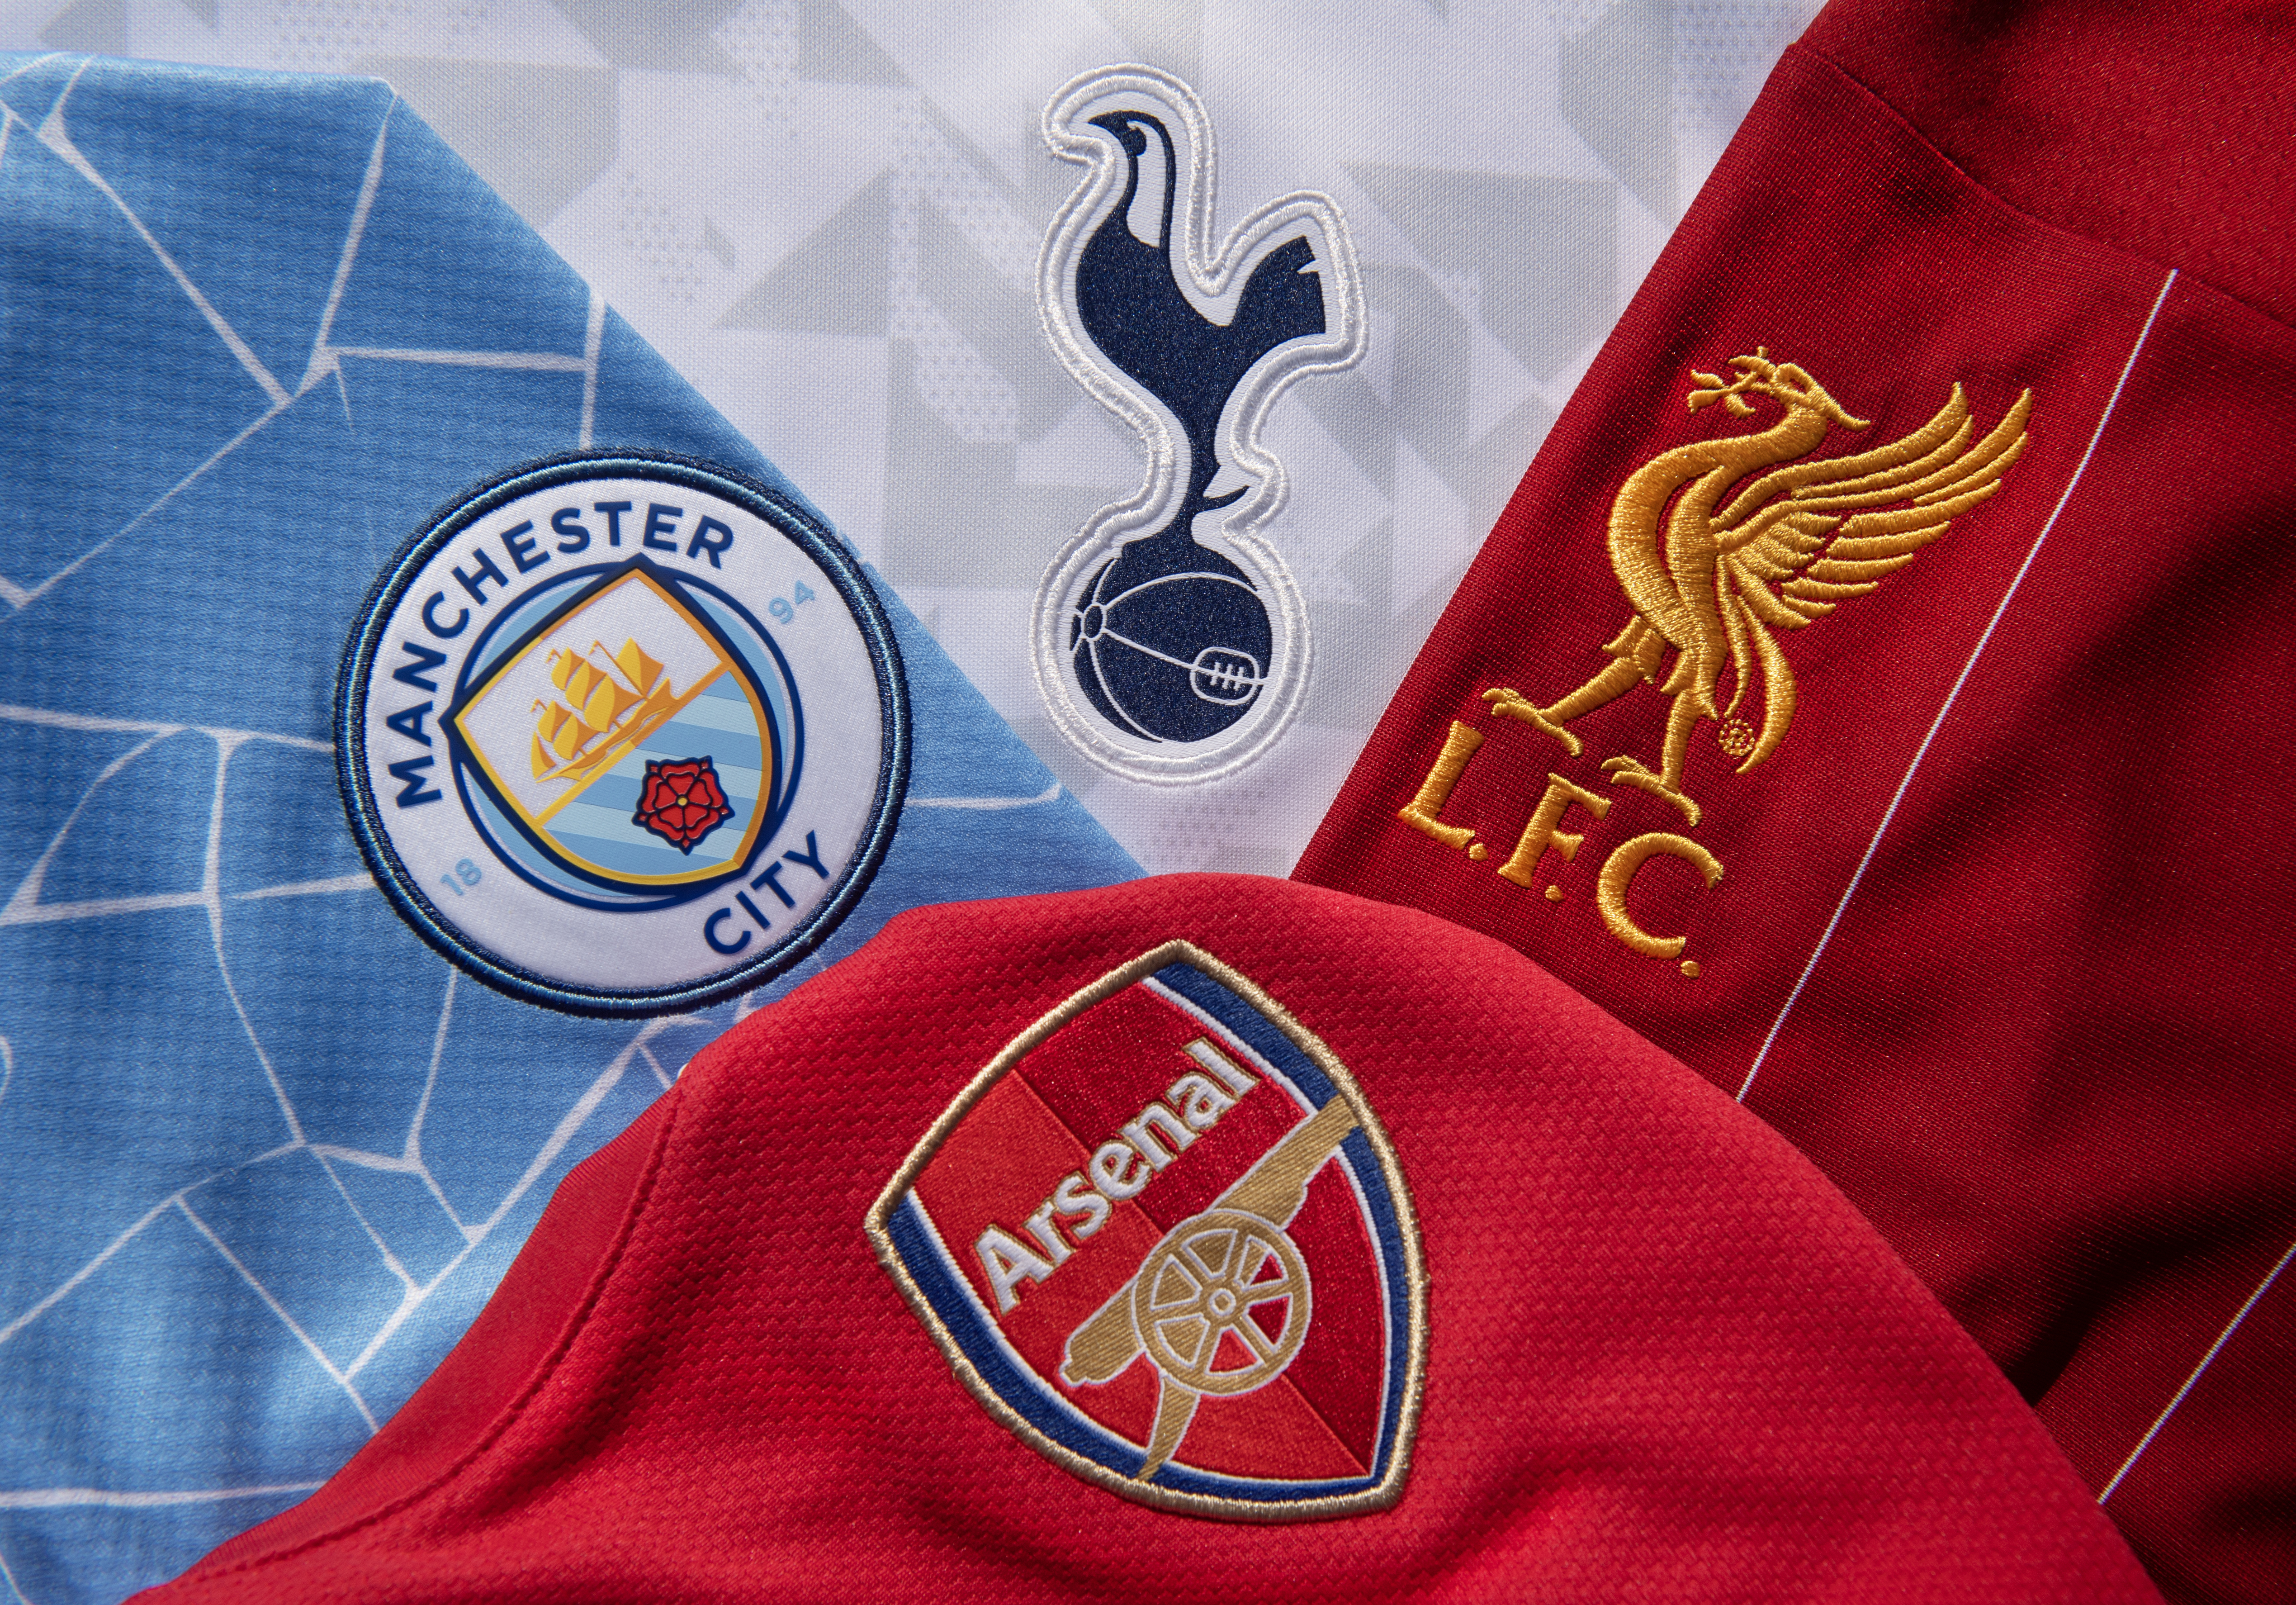 The Badges of the Top Four Teams in the Premier League